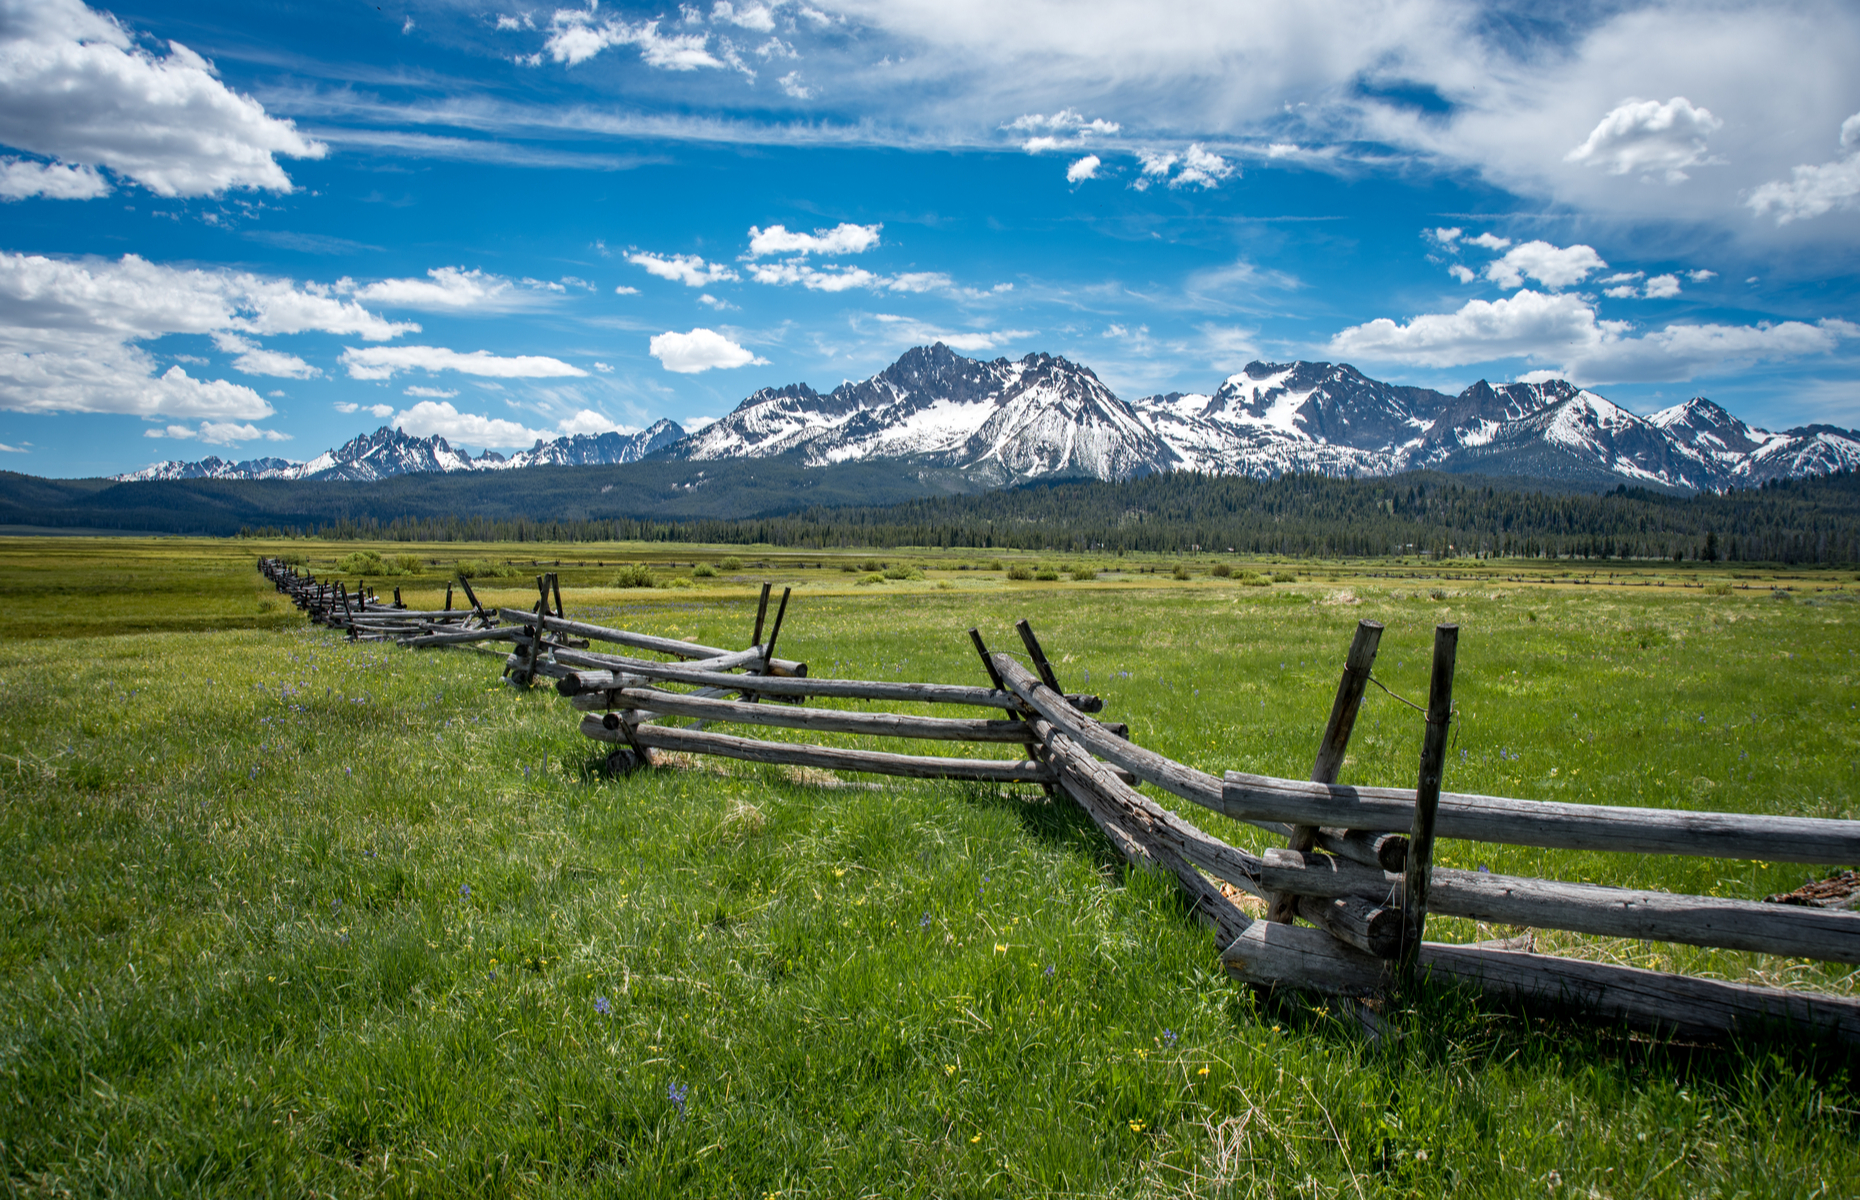 <p>Offering a captivating experience of the Idaho Rockies, the 116-mile road connects Shoshone to the resort towns of Sun Valley, Hailey and Ketchum. While you could drive the <a href="https://visitidaho.org/things-to-do/road-trips/sawtooth-scenic-byway/" title="https://visitidaho.org/things-to-do/road-trips/sawtooth-scenic-byway/">Sawtooth Scenic Byway</a> in three hours, you’ll want to take much longer to visit the Ernest Hemingway Memorial, see the amazing view 8,700 feet up at the Galena Summit, enjoy boating and fishing at scenic mountain lakes, and admire the surreal, lava-rock sculptures of Black Magic Canyon.</p>